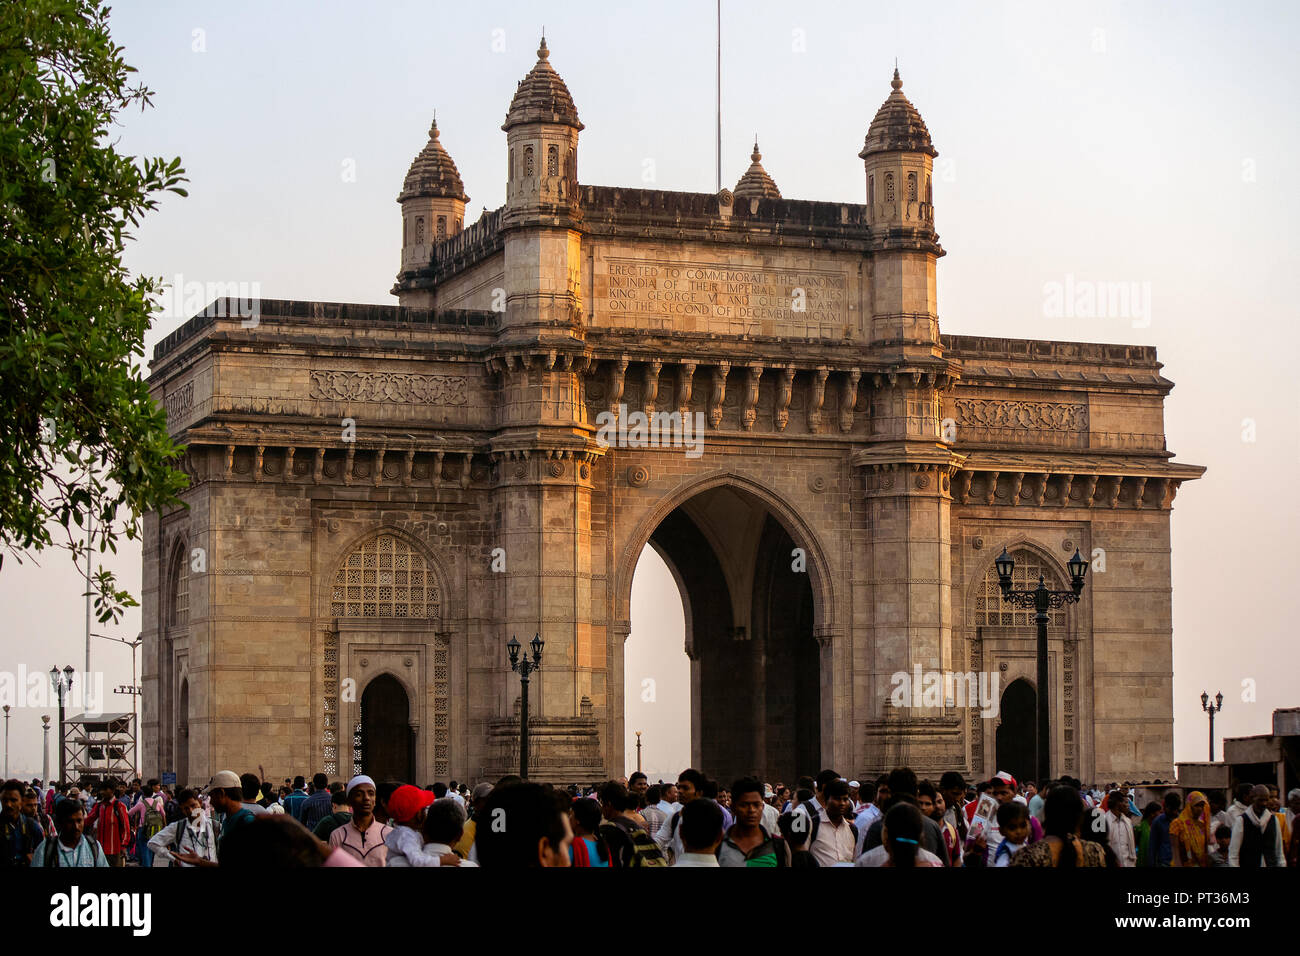 The Gateway of India. A great landmark for national and international tourists visiting Mumbai, India. Stock Photo